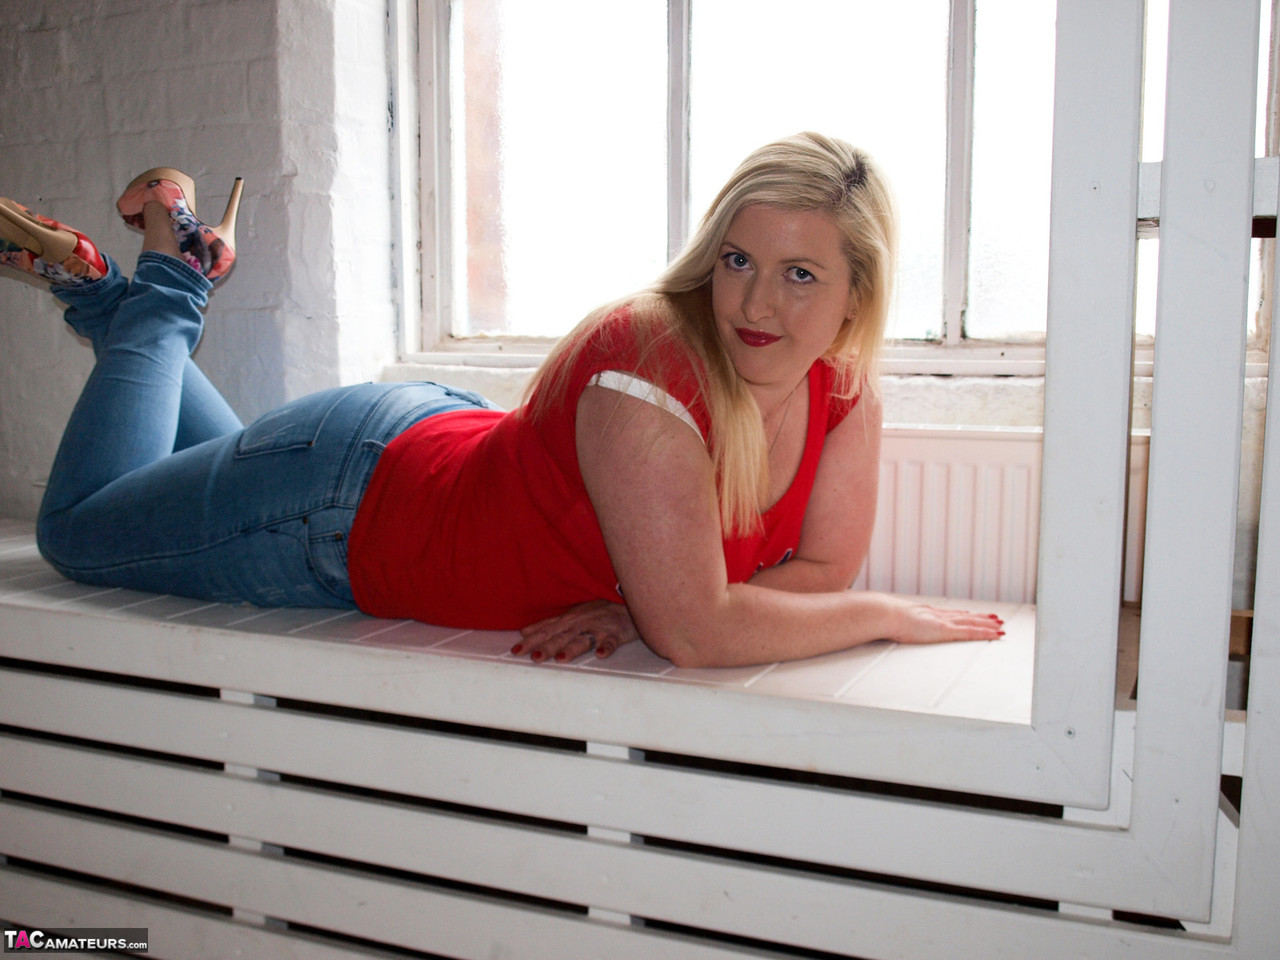 Blonde amateur Samantha exposes her thick body near a window 色情照片 #427406662 | TAC Amateurs Pics, Samantha, Jeans, 手机色情